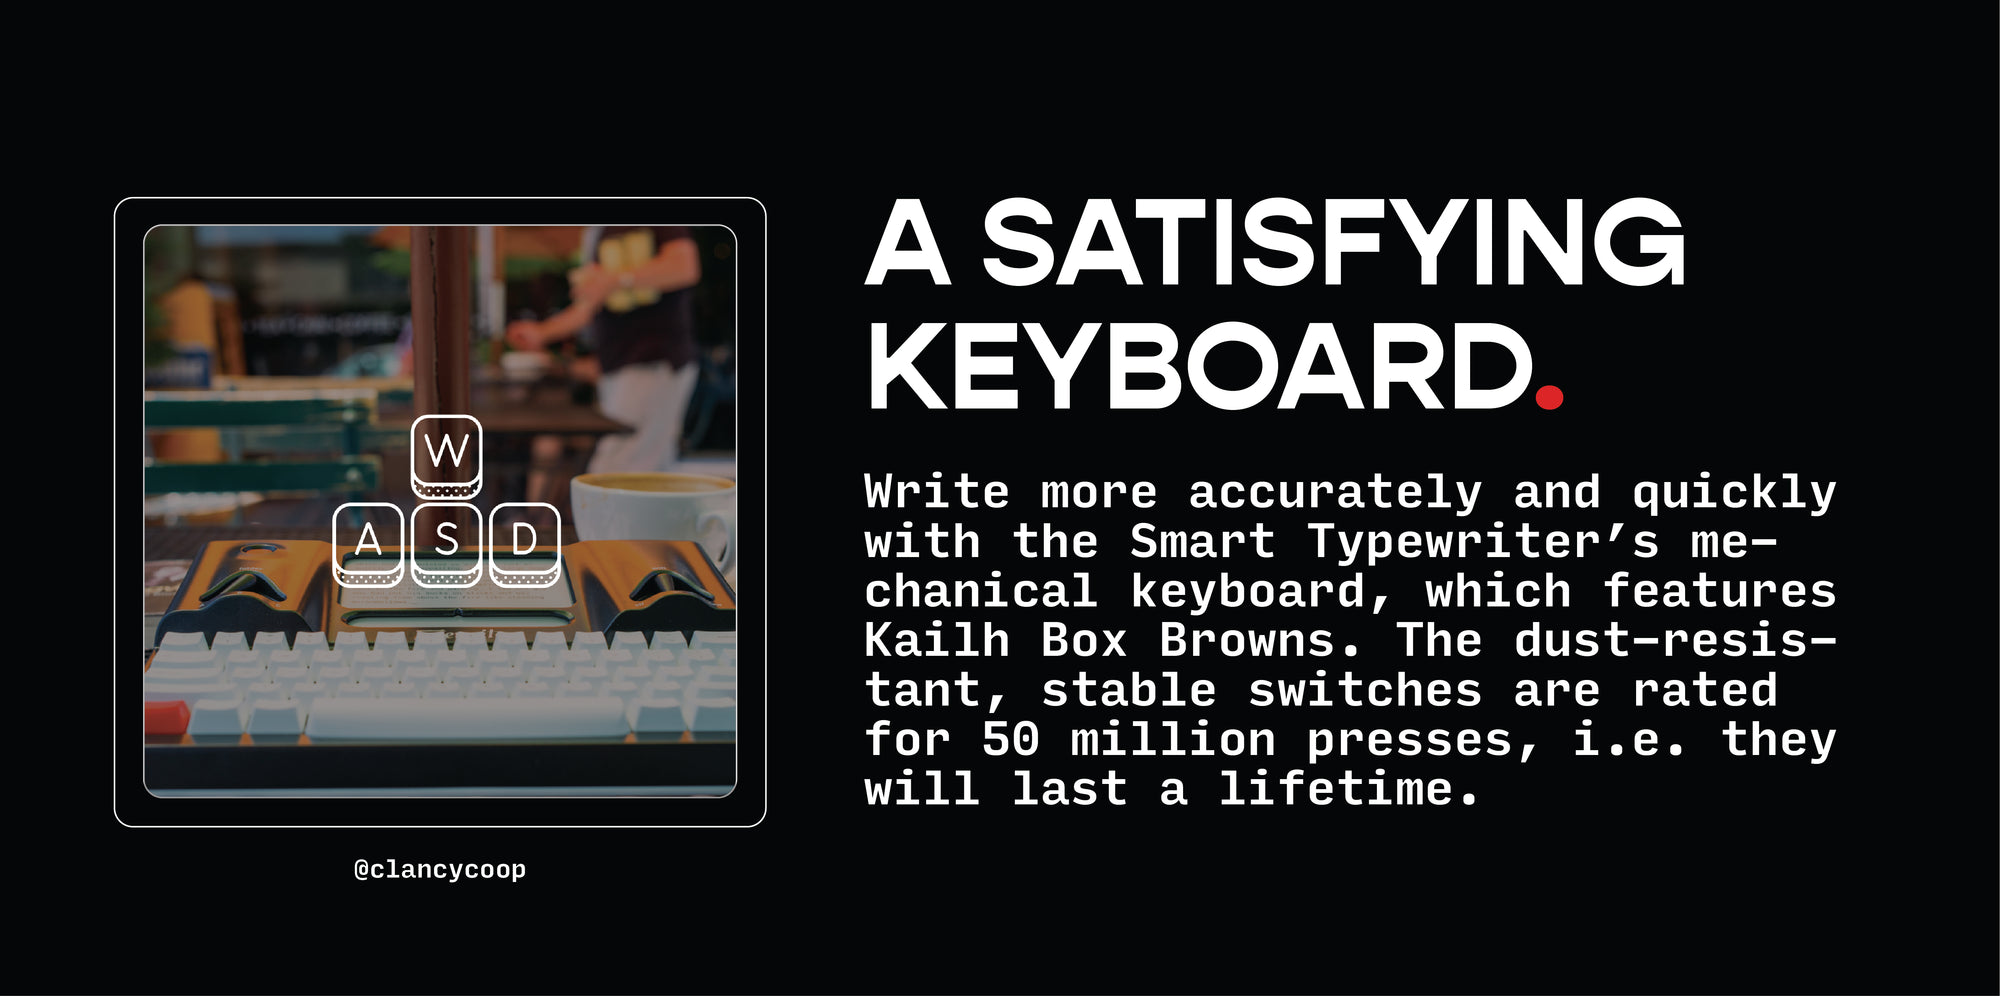 A SATISFYING KEYBOARD.  Write more accurately and quickly with the Smart Typewriter’s mechanical keyboard, which features Kailh Box Browns. The dust-resistant, stable switches are rated for 50 million presses, i.e. they will last a lifetime.